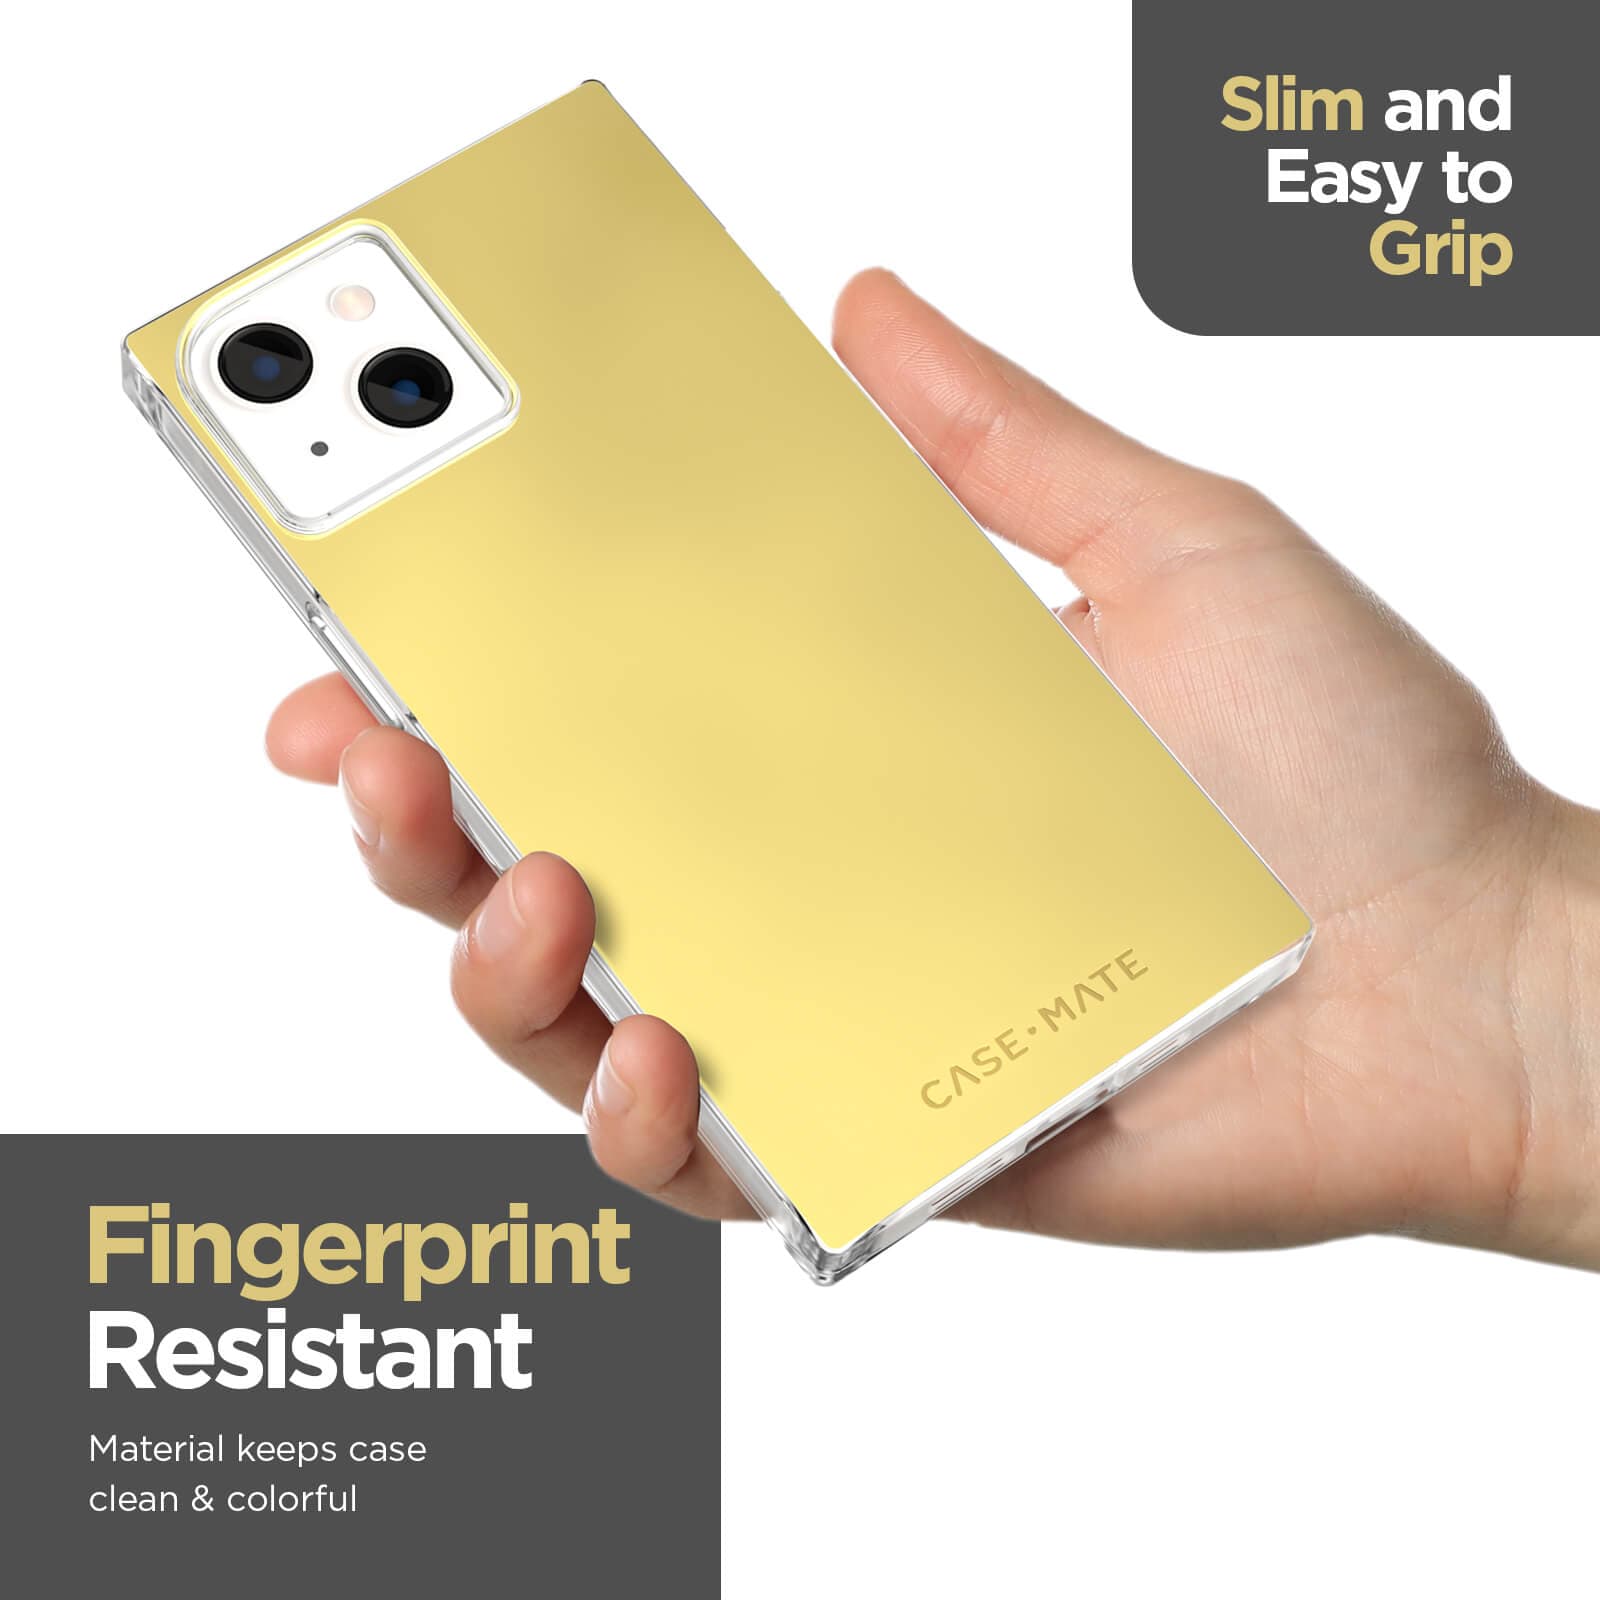 Slim and easy to grip. Fingerprint resistant material keeps case clean & colorful. color::Gold